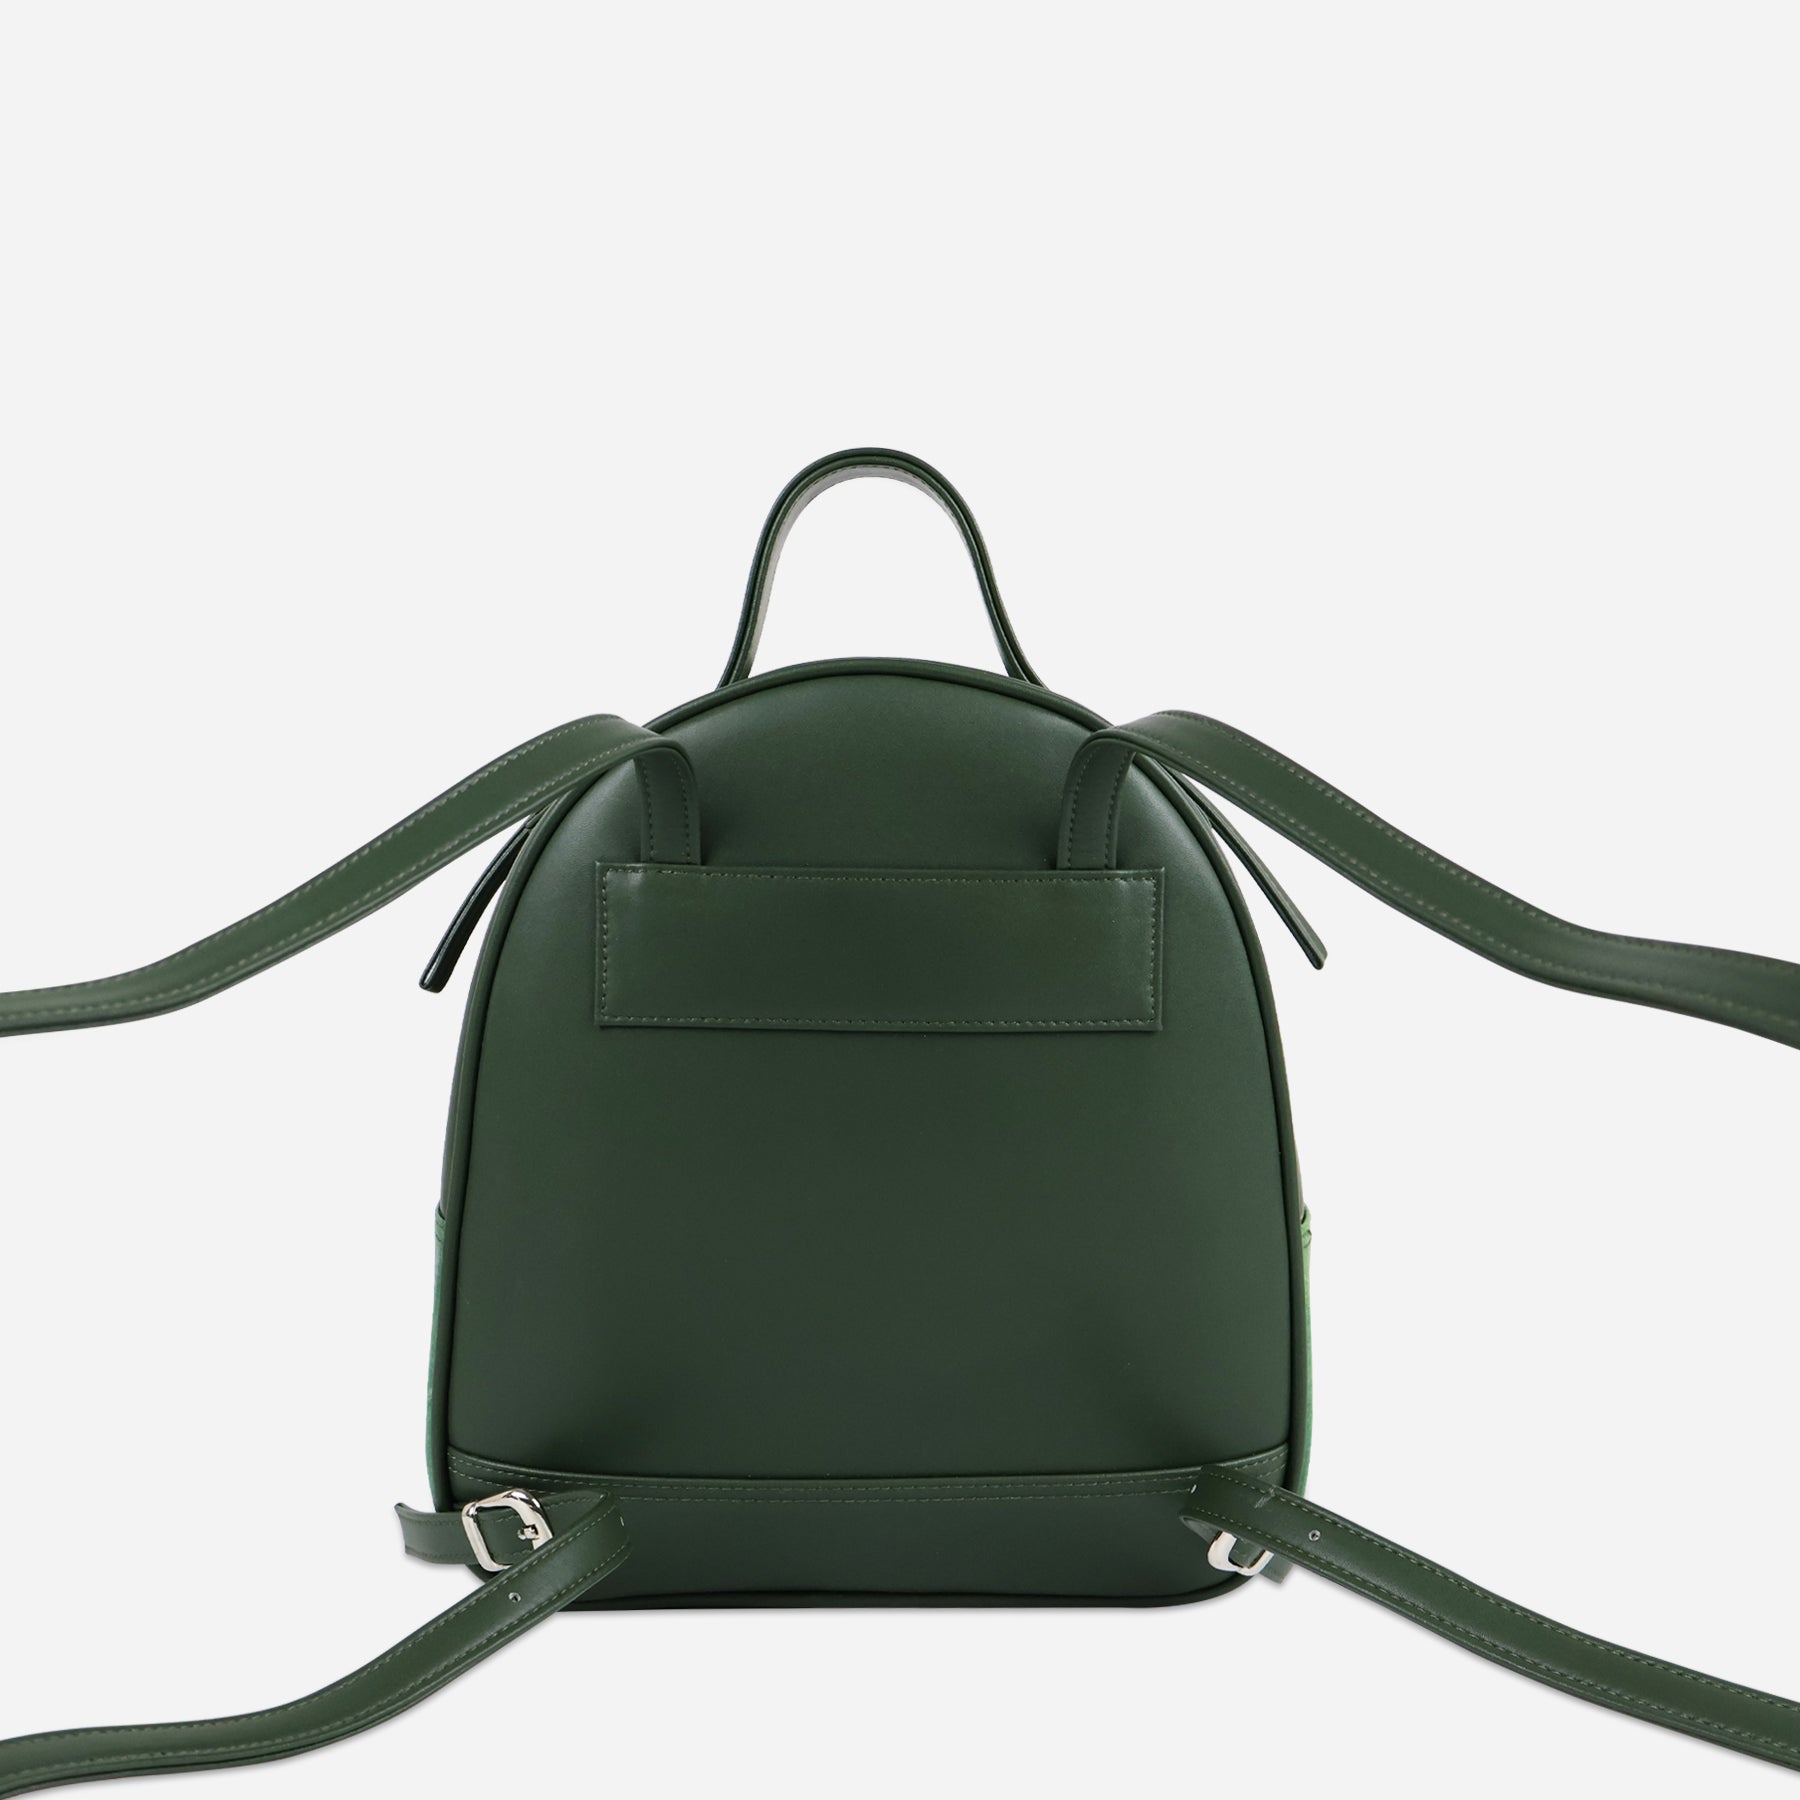 Rachel small backpack - Forest green leaf leather